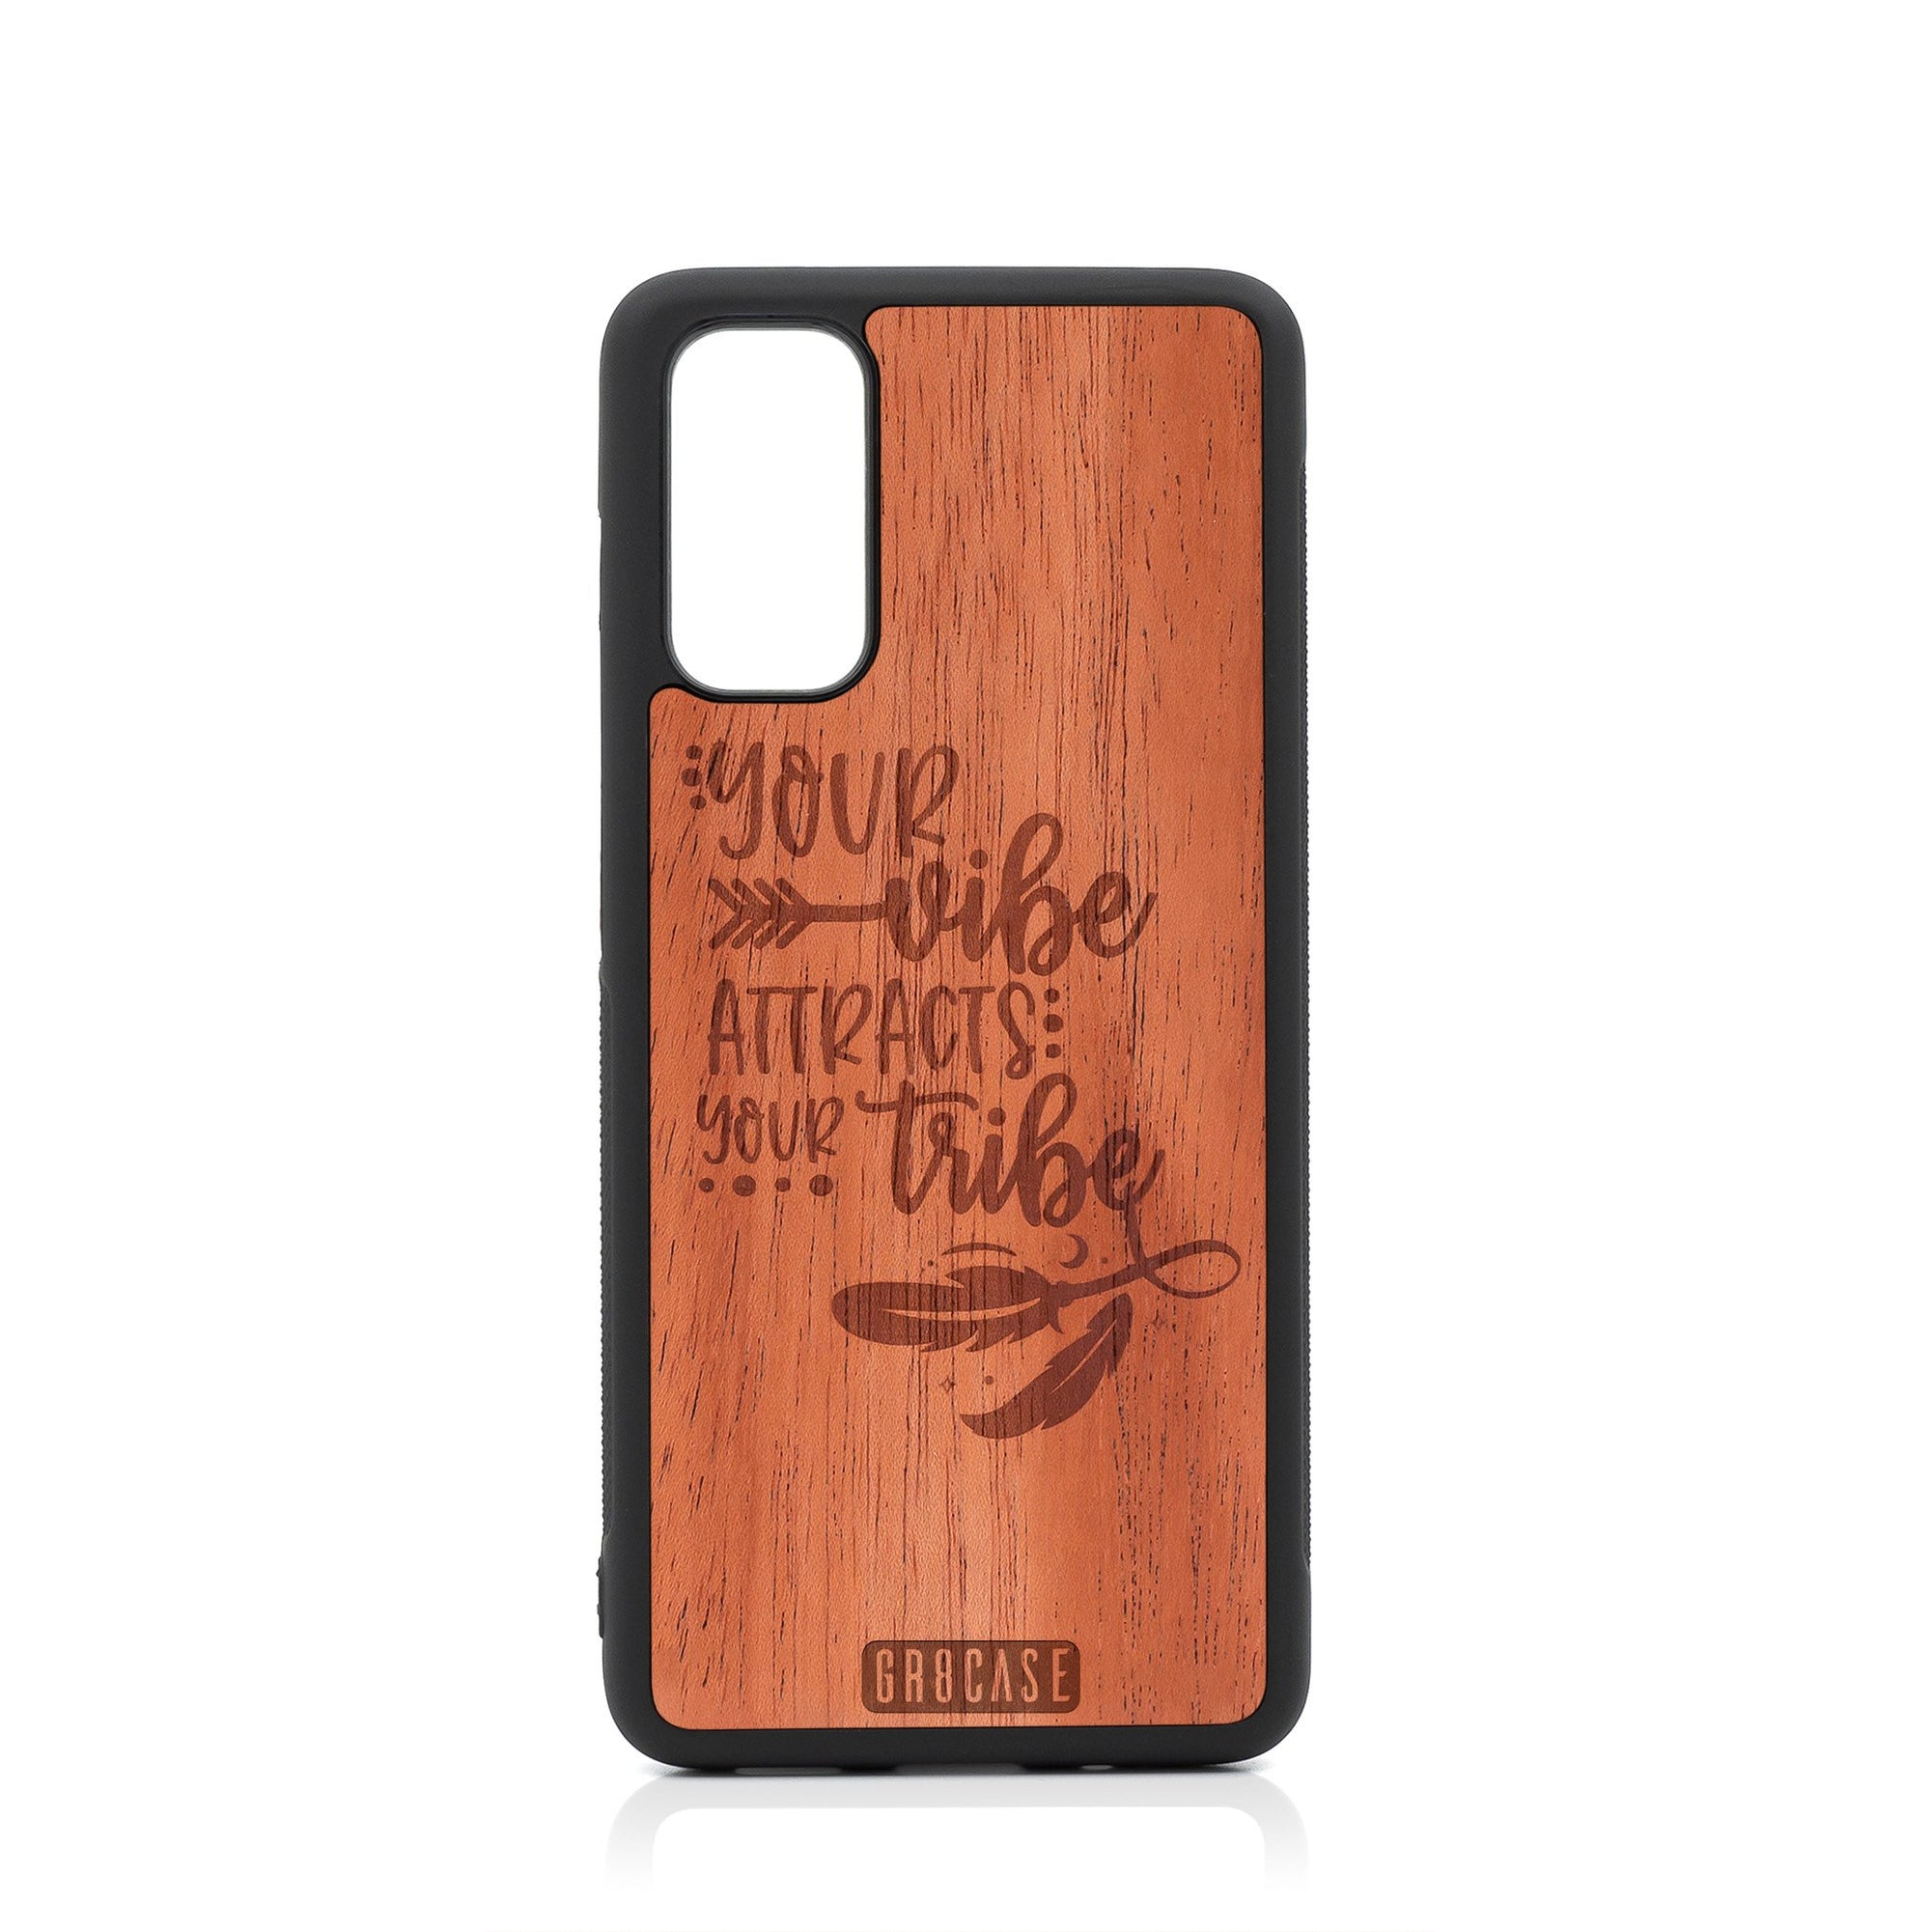 Your Vibe Attracts Your Tribe Design Wood Case For Samsung Galaxy S20 FE 5G